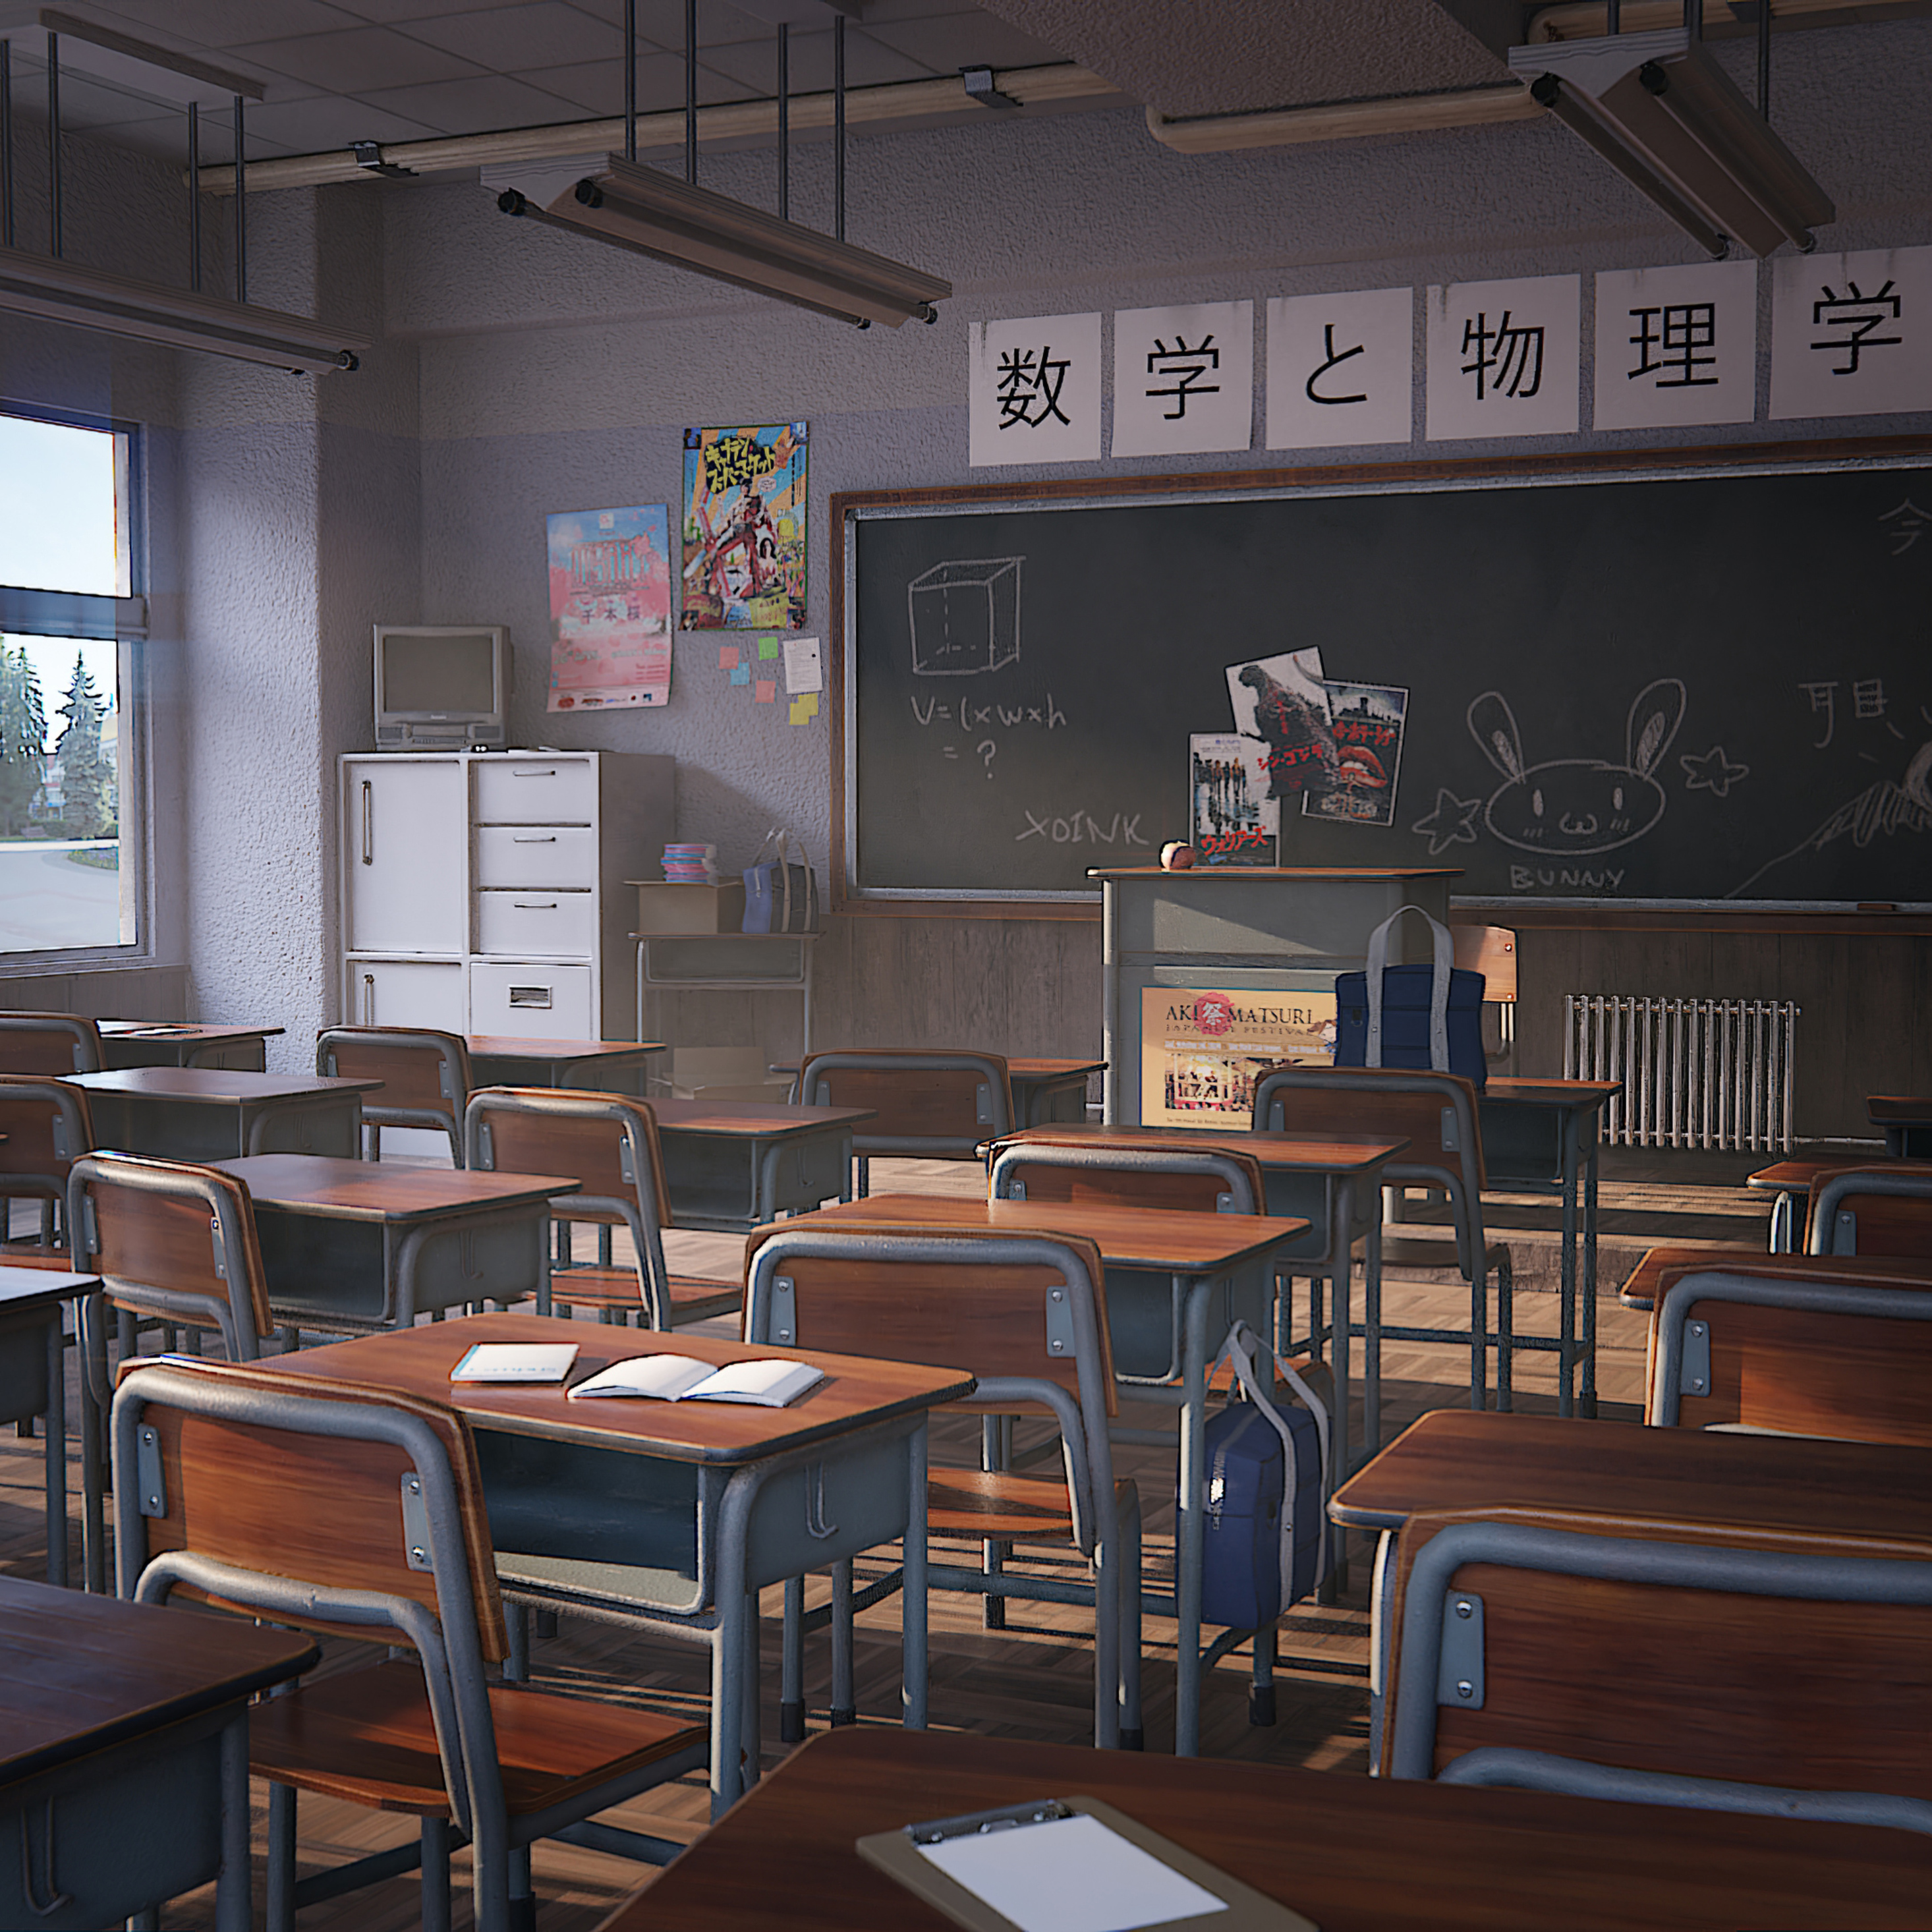 Japanese Classroom 4k iPad Pro Retina Display HD 4k Wallpaper, Image, Background, Photo and Picture